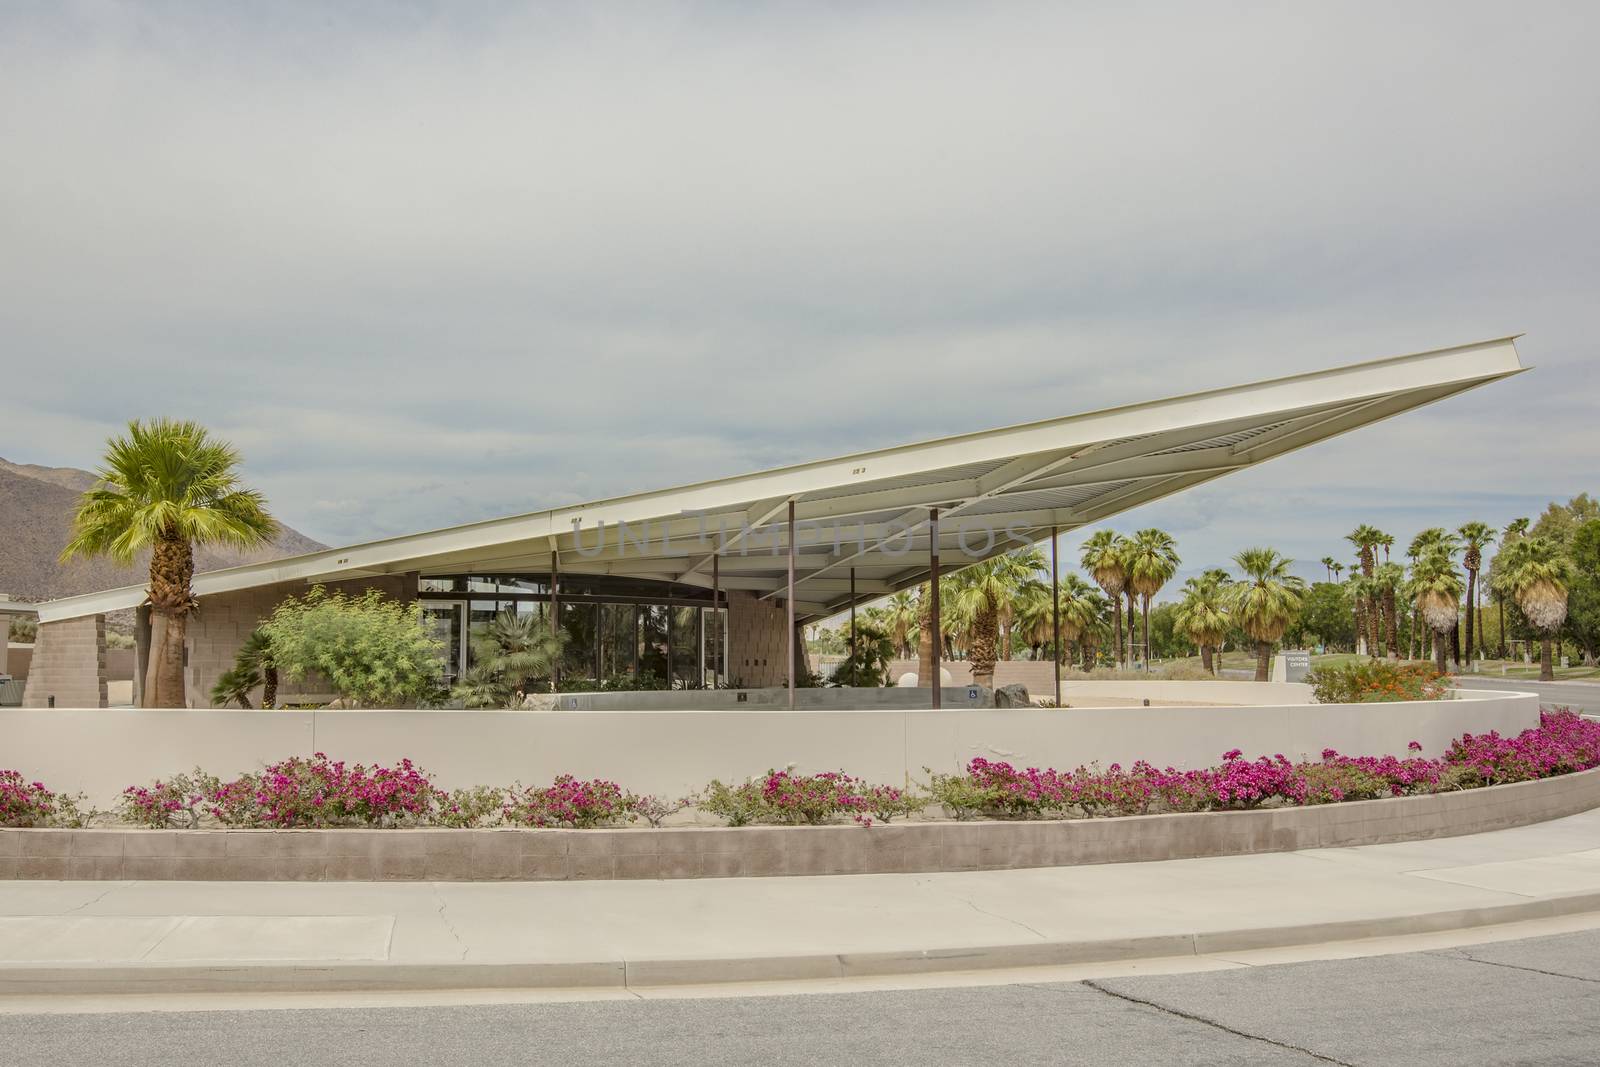 Historic Tramway Gas Station in Palm Springs by Creatista